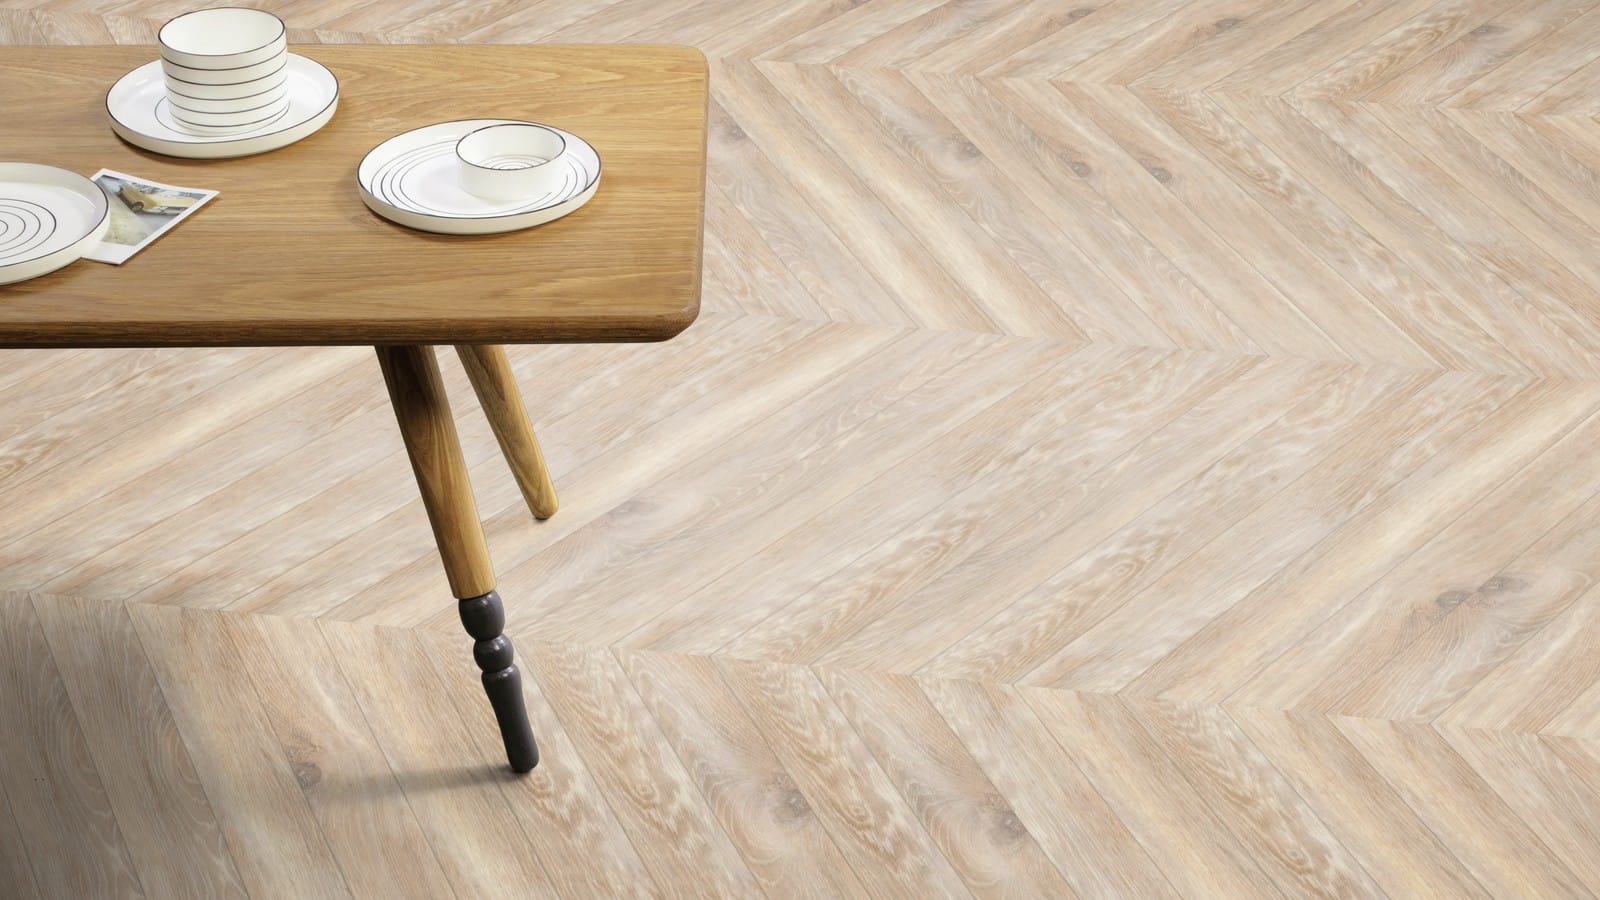 The Ribbon Pleat design of Lime Washed Wood luxury vinyl tile by Amtico